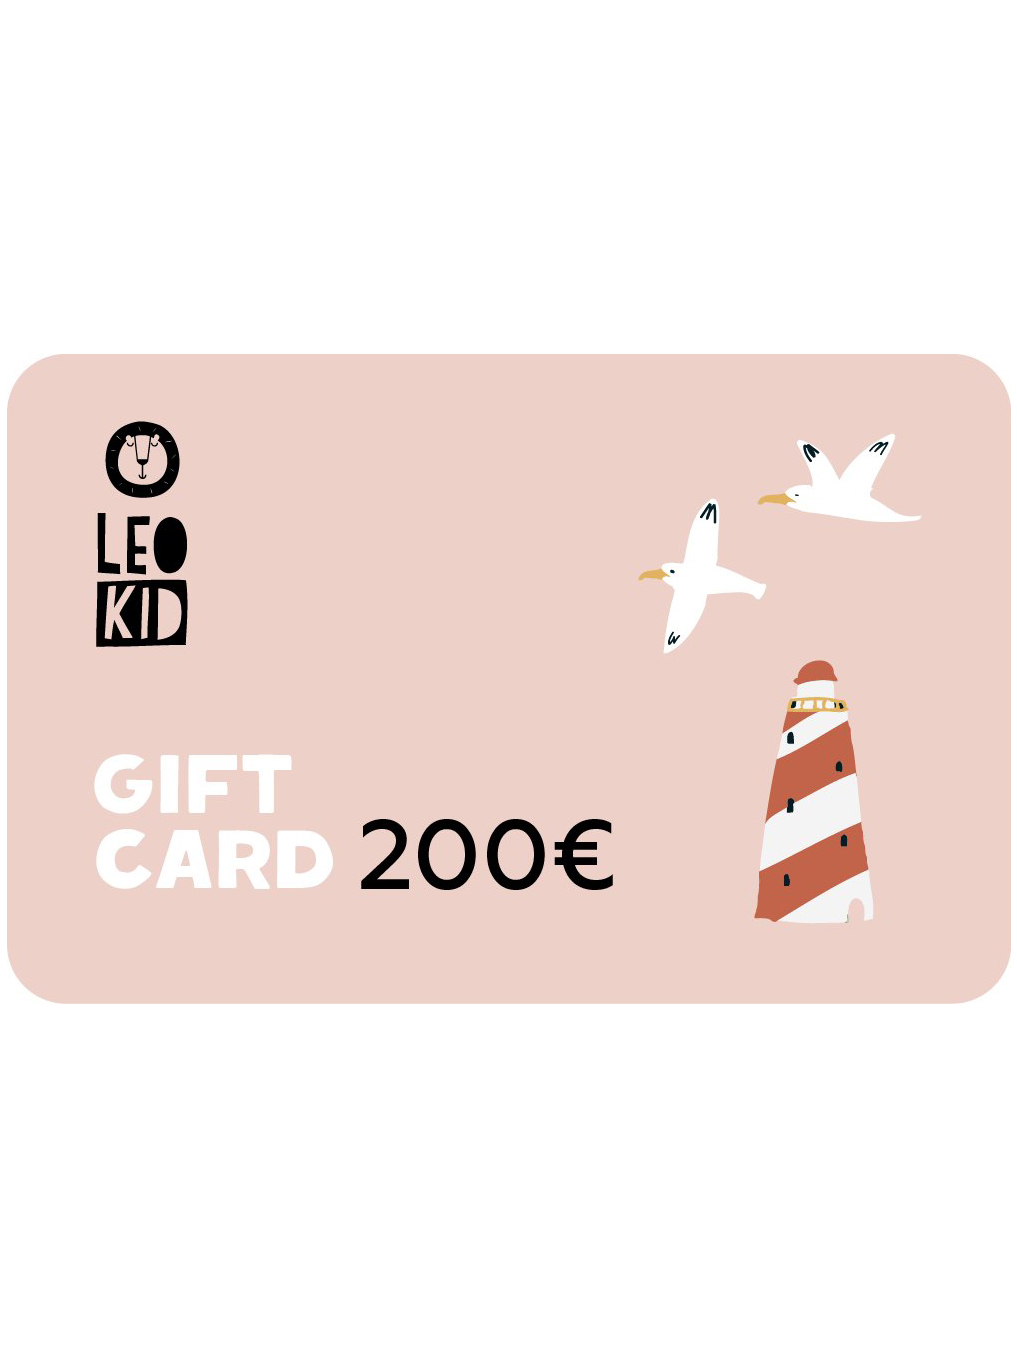 Electronic gift card 200€